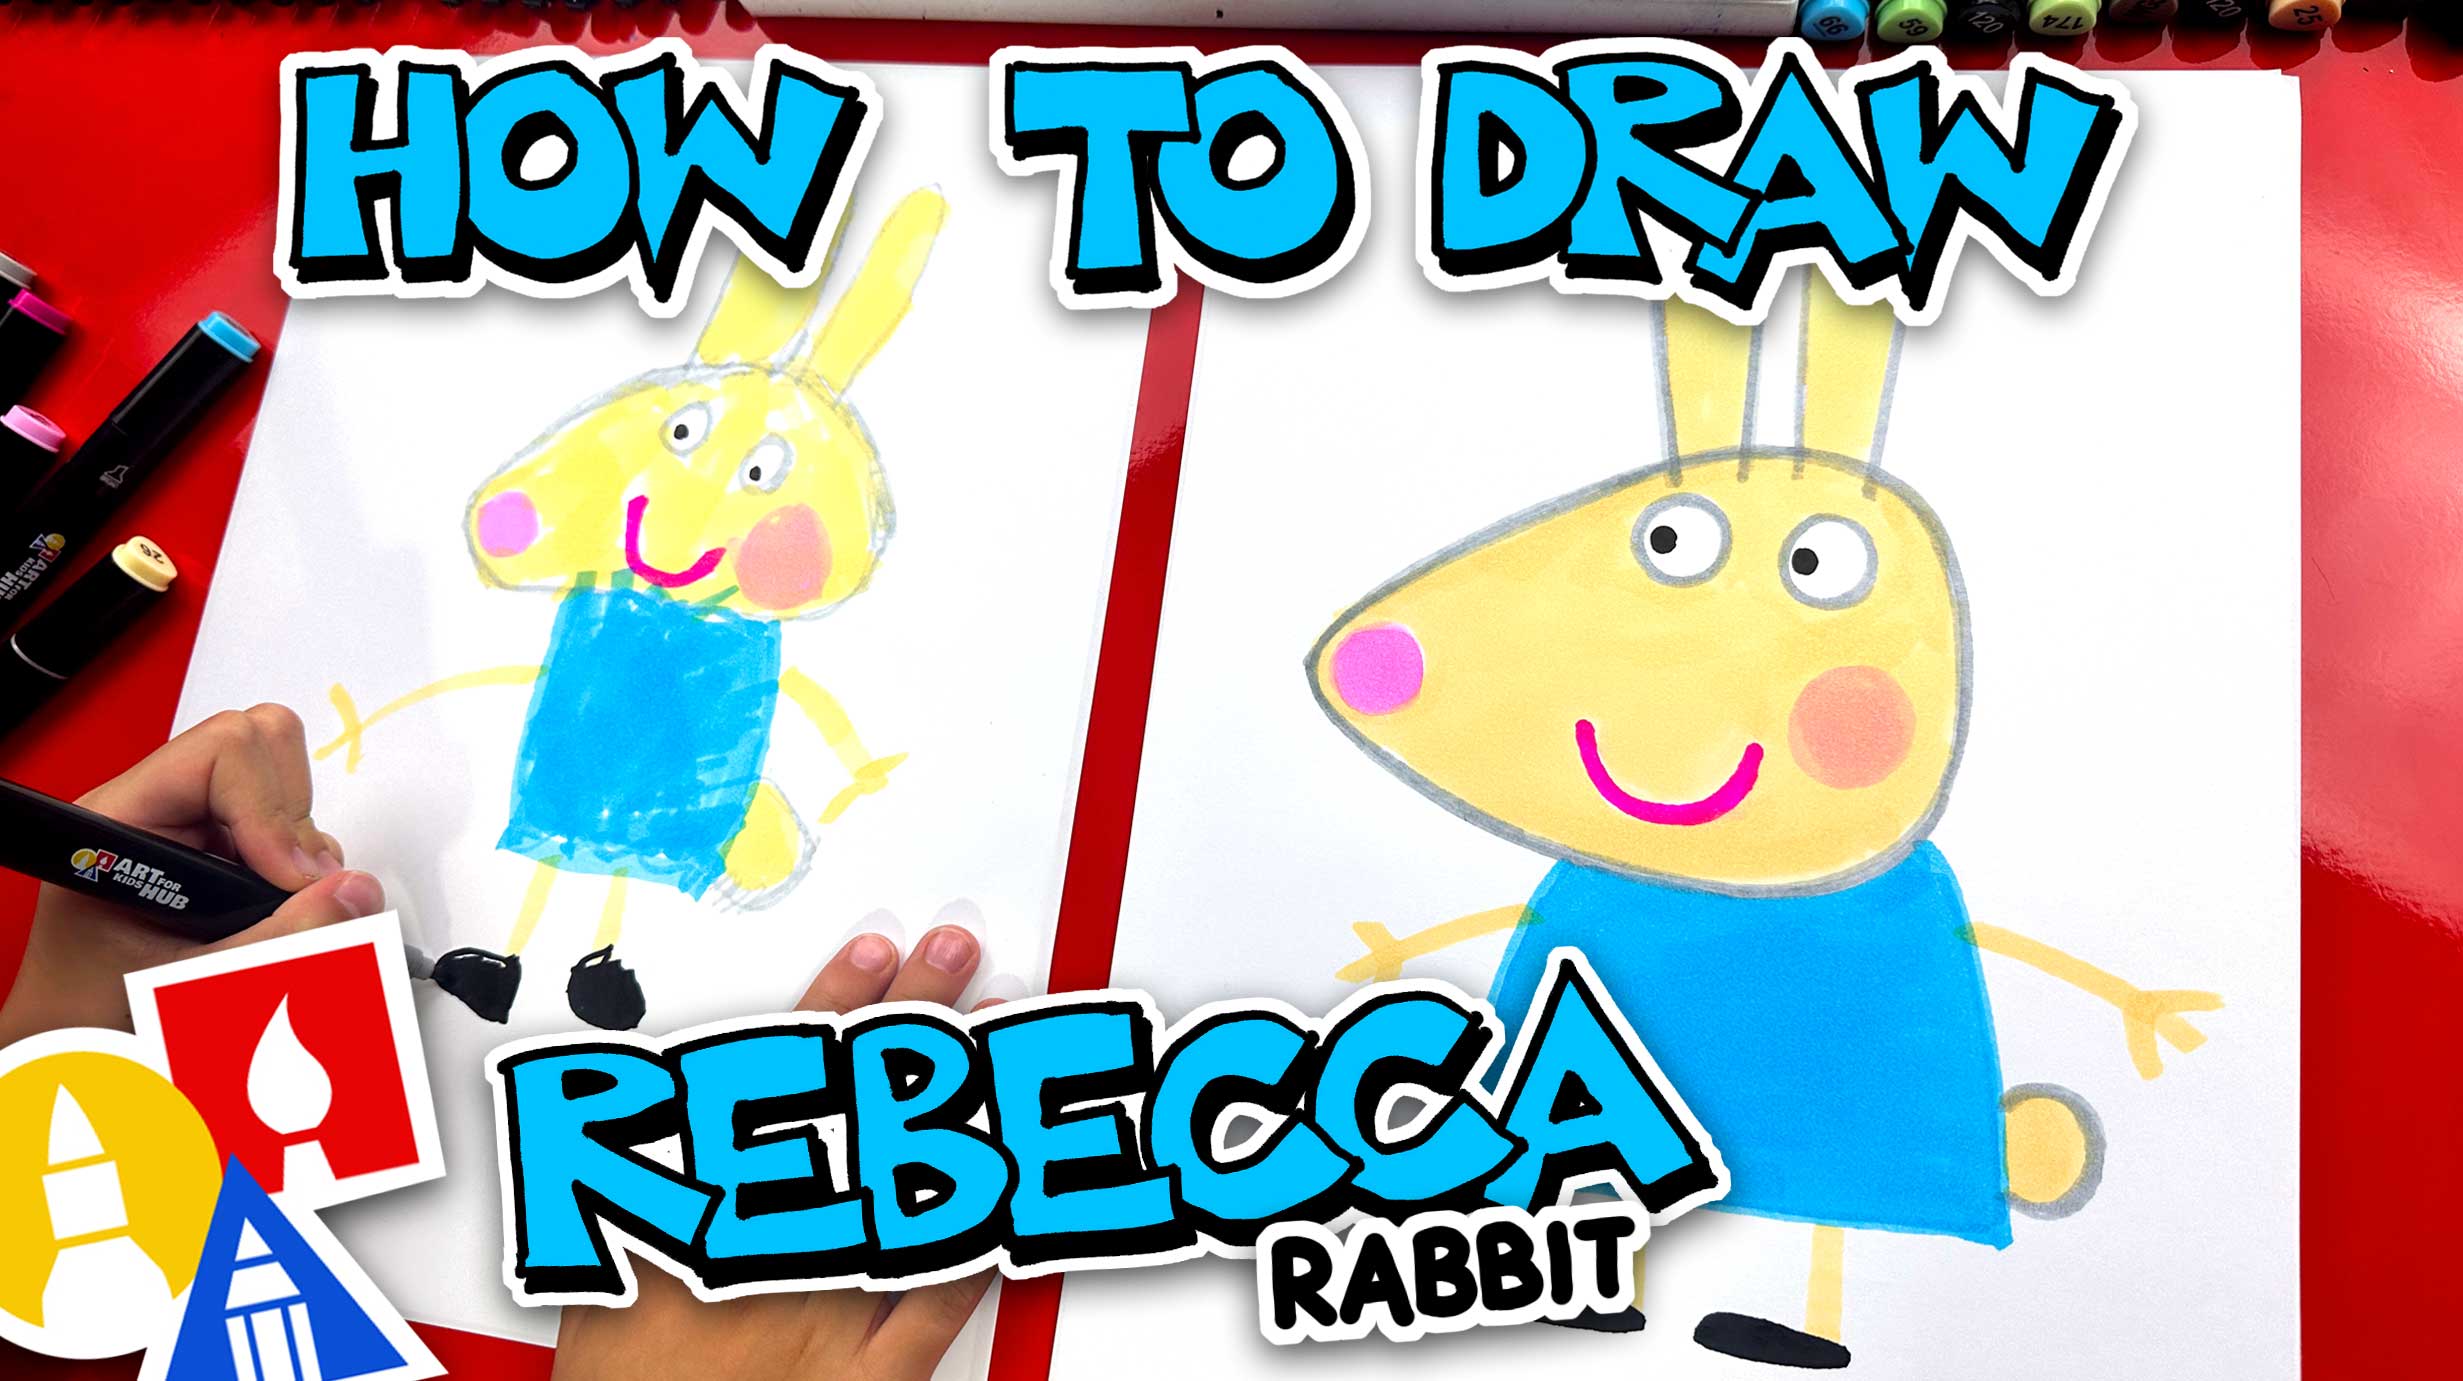 How To Draw Rebecca Rabbit From Peppa Pig - Art For Kids Hub